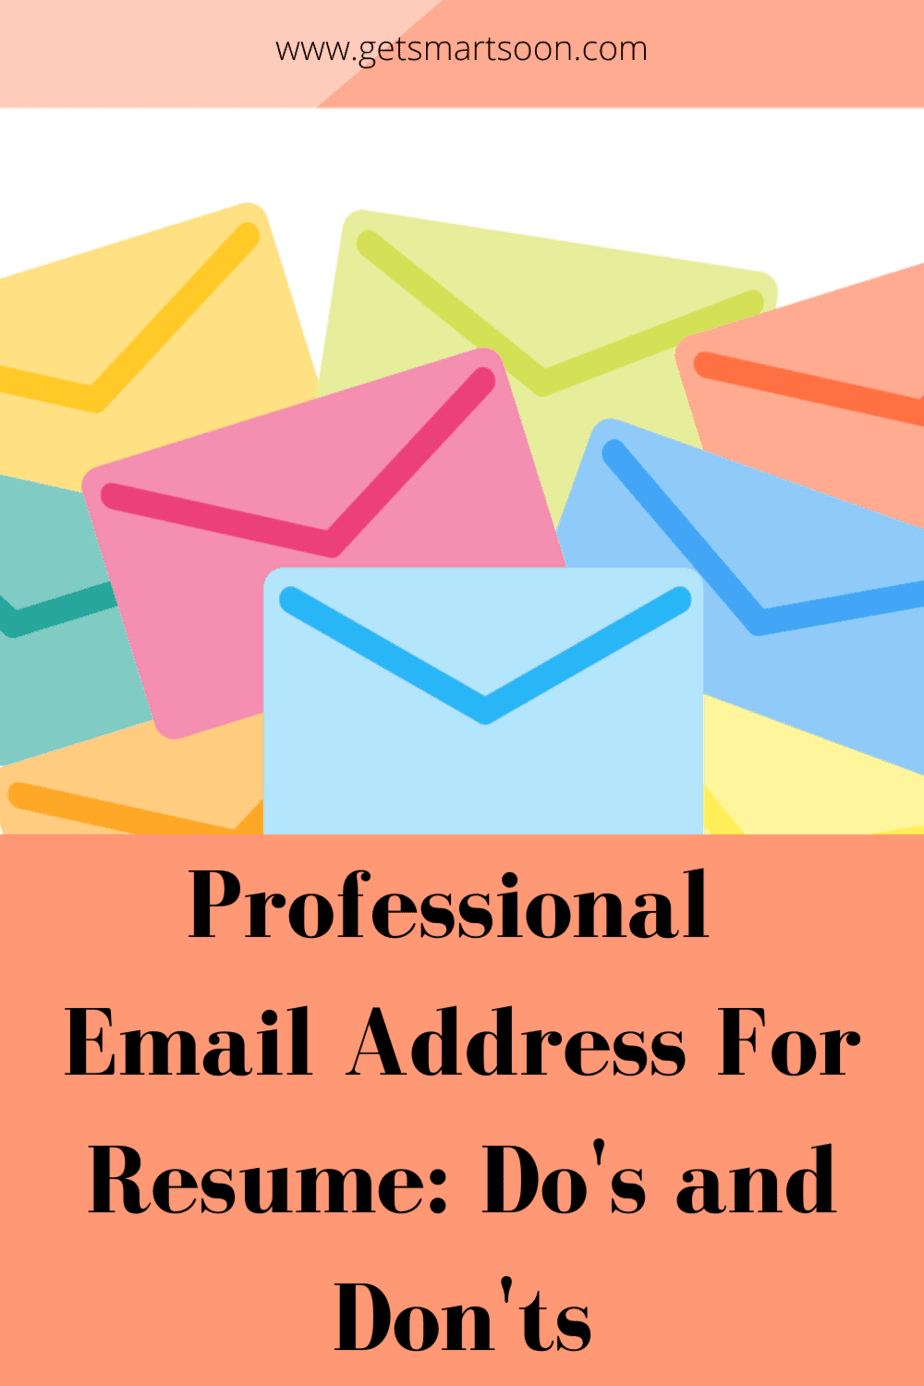 Professional Email Address For Resume: Do’s and Don’ts